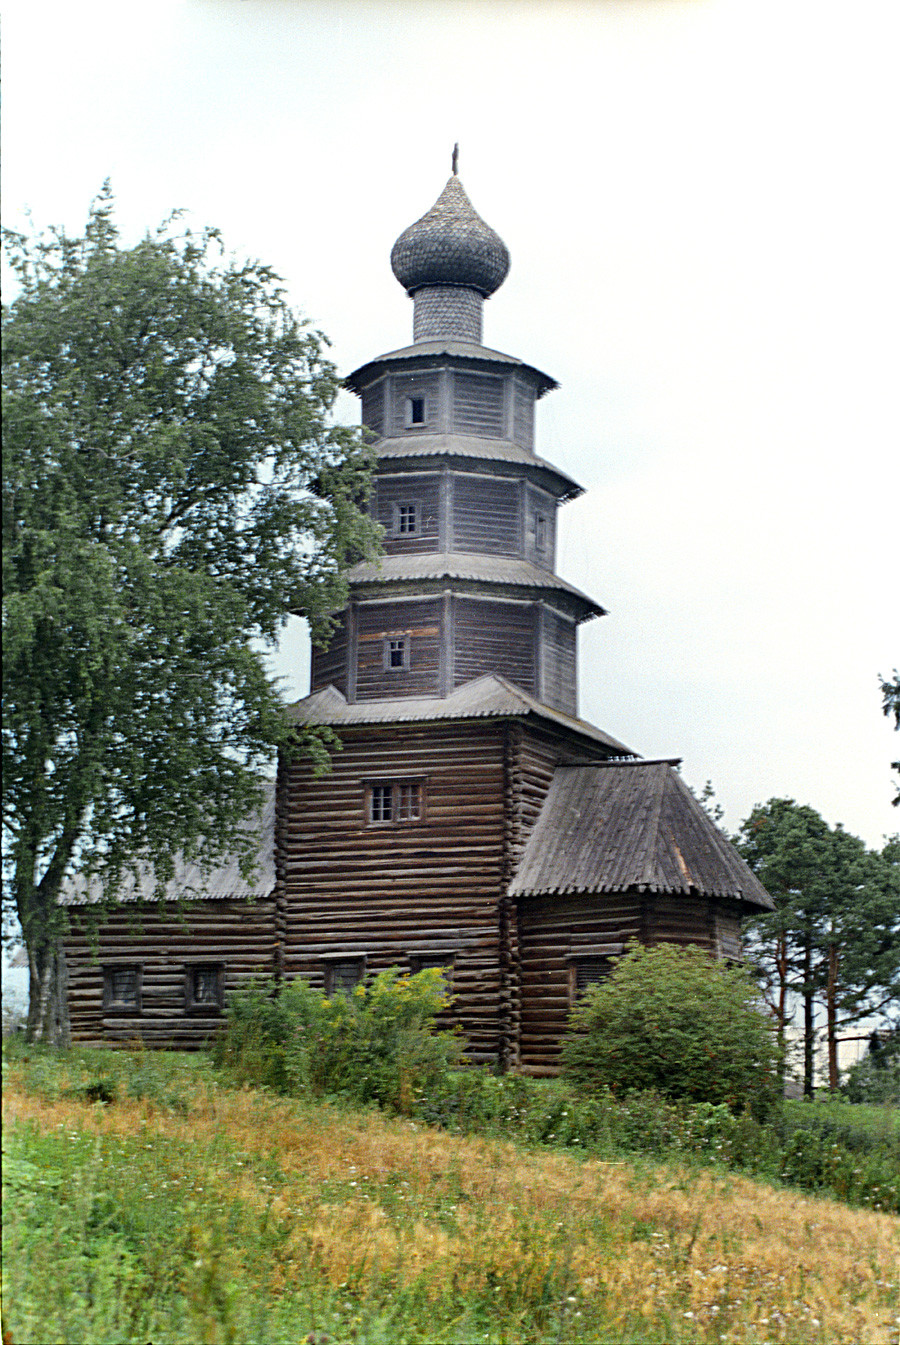 Church of the Tikhvin Icon (Old Church of the Ascension), southeast view.  Aug. 18, 2006.